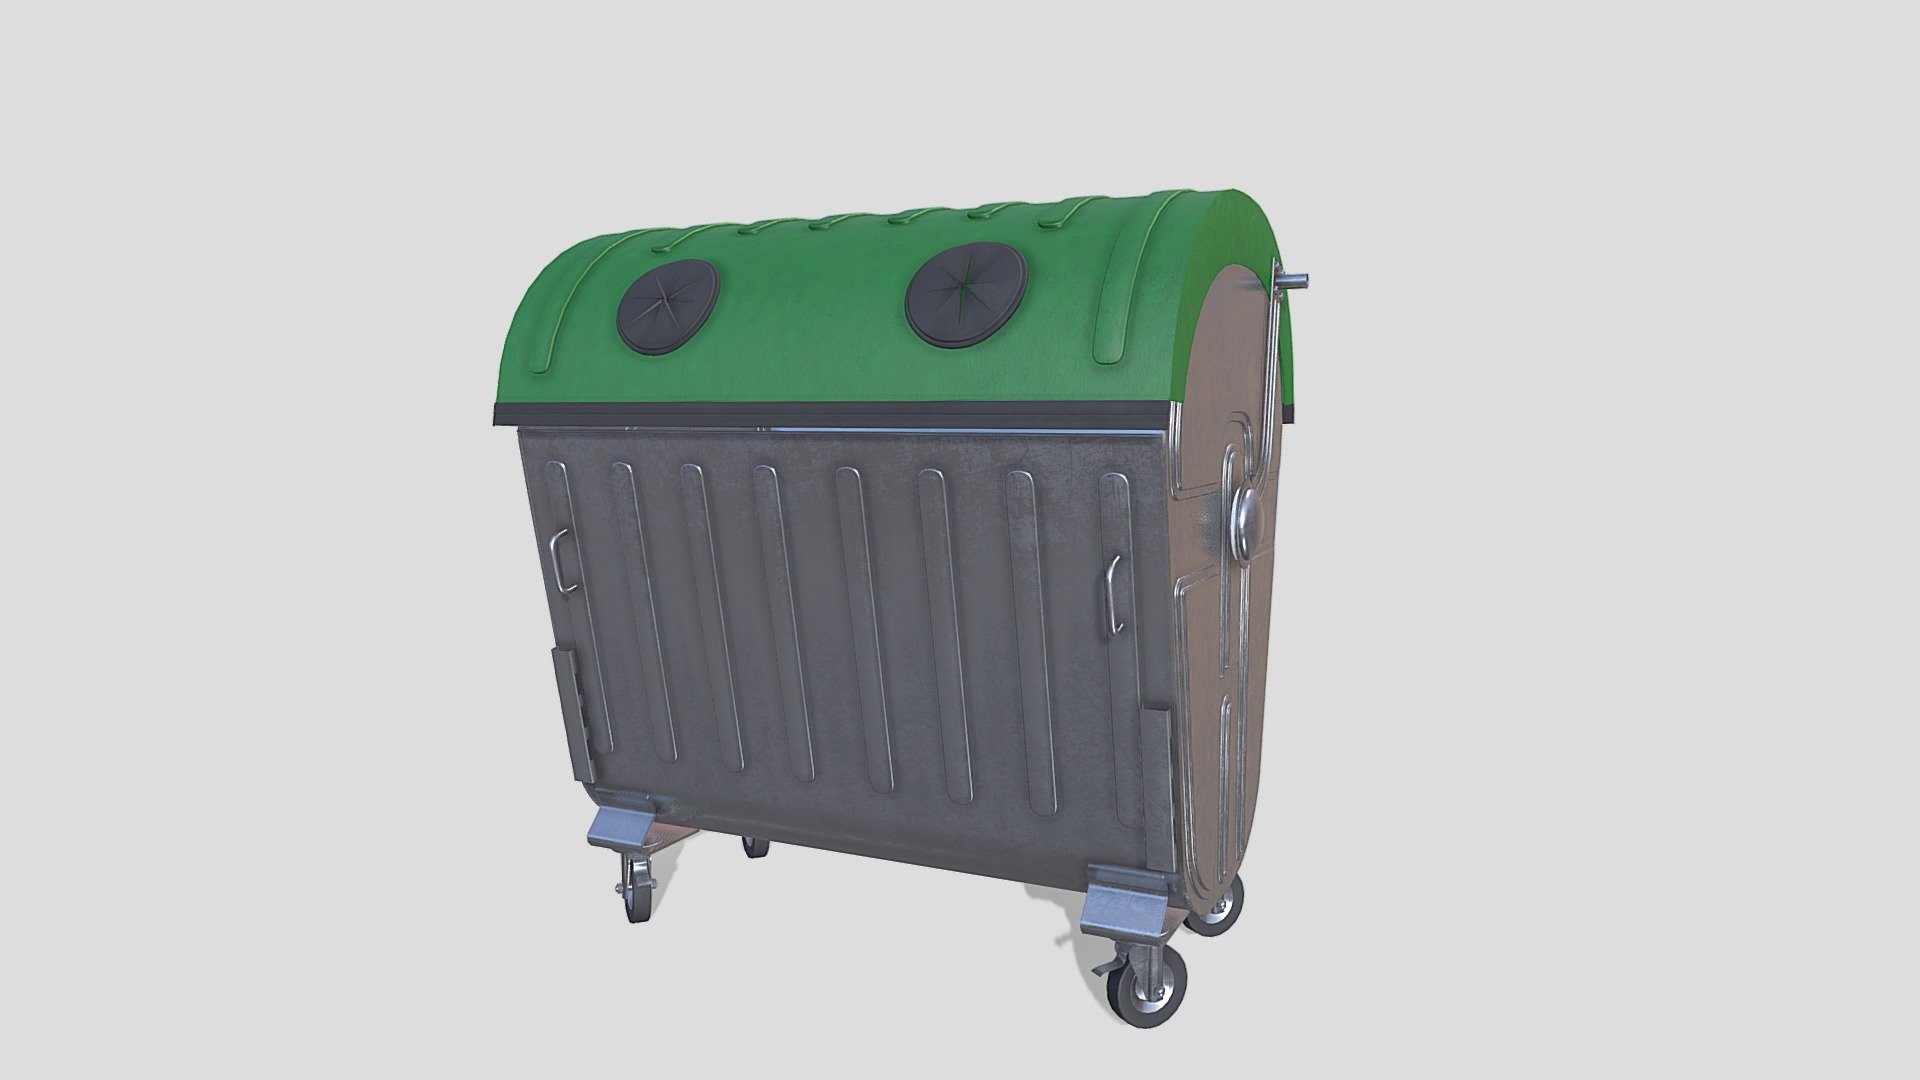 Dumpster 3d model rendered with Cycles in Blender, as per seen on attached images. 

File formats:
-.blend, rendered with cycles, as seen in the images;
-.obj, with materials applied;
-.dae, with materials applied;
-.fbx, with materials applied;
-.stl;

Files come named appropriately and split by file format.

3D Software:
The 3D model was originally created in Blender 3.1 and rendered with Cycles.

Materials and textures:
The models have materials applied in all formats, and are ready to import and render.
Materials are image based using PBR, the model comes with five 4k png image textures.

Preview scenes:
The preview images are rendered in Blender using its built-in render engine &lsquo;Cycles'.
Note that the blend files come directly with the rendering scene included and the render command will generate the exact result as seen in previews.

General:
The models are built mostly out of quads.

For any problems please feel free to contact me.

Don't forget to rate and enjoy! - Dumpster v5 - Buy Royalty Free 3D model by dragosburian 3d model